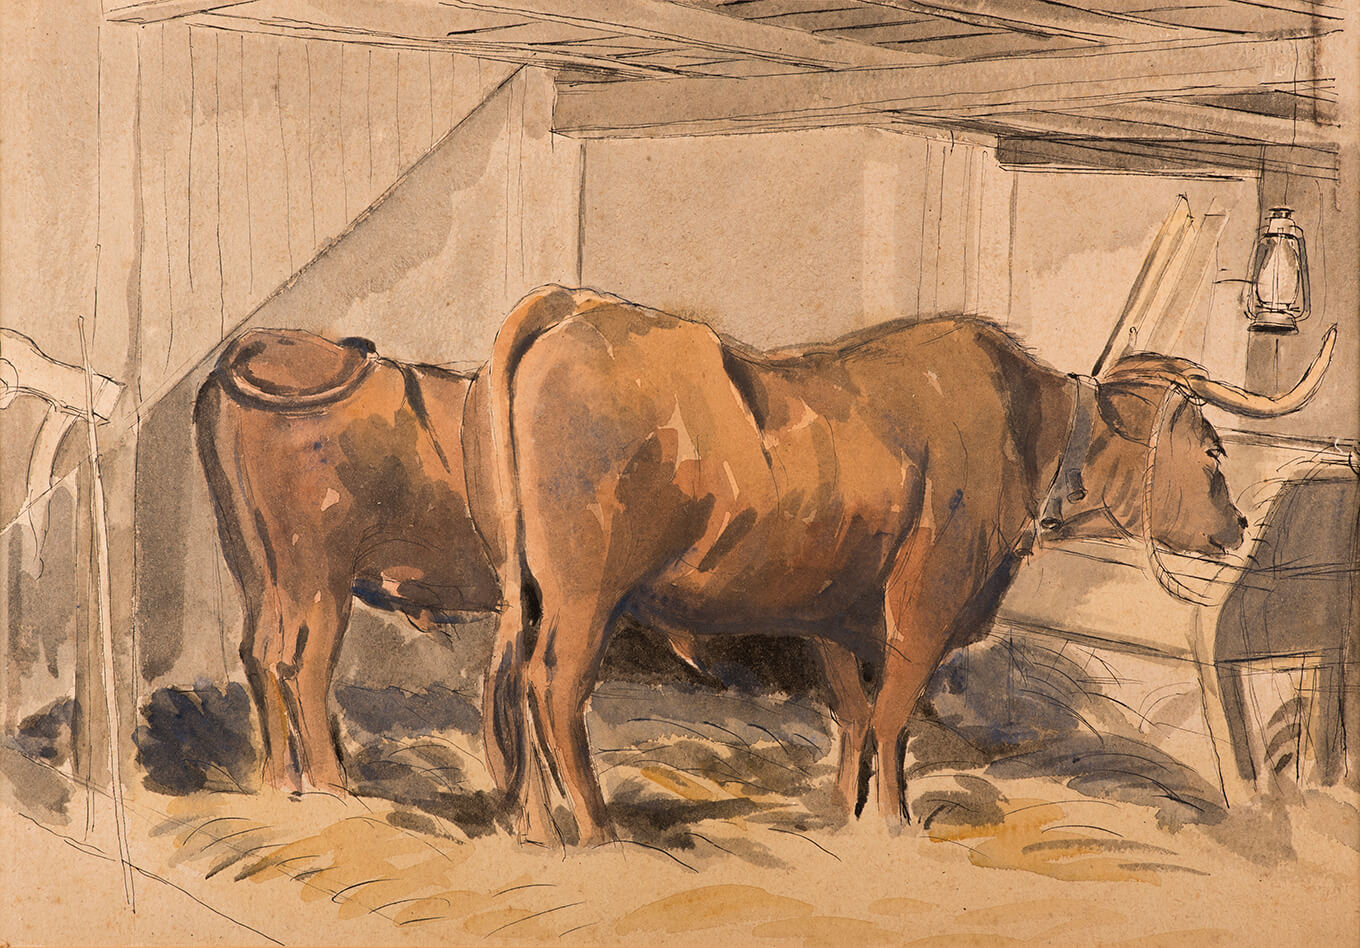 Karl Hagedorn - Oxen in a stable